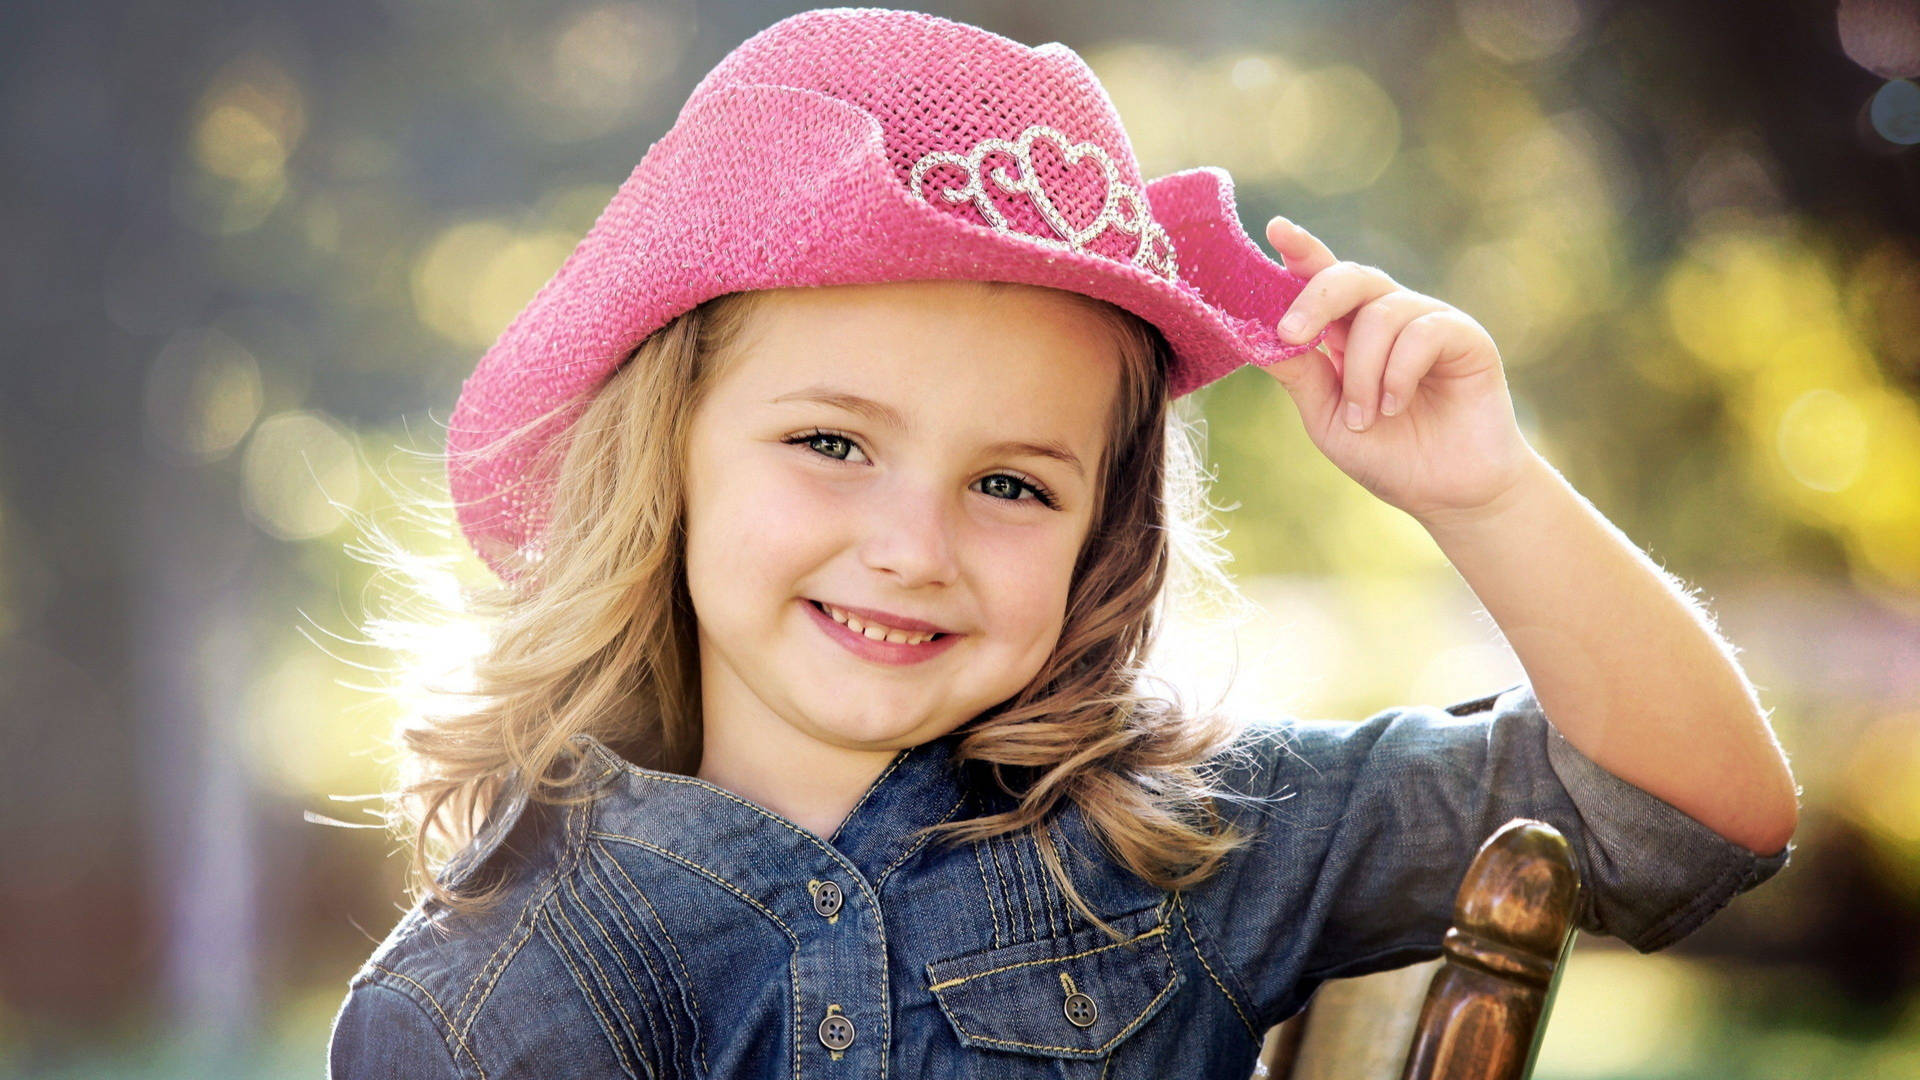 little girl» 1080P, 2k, 4k HD wallpapers, backgrounds free download | Rare  Gallery